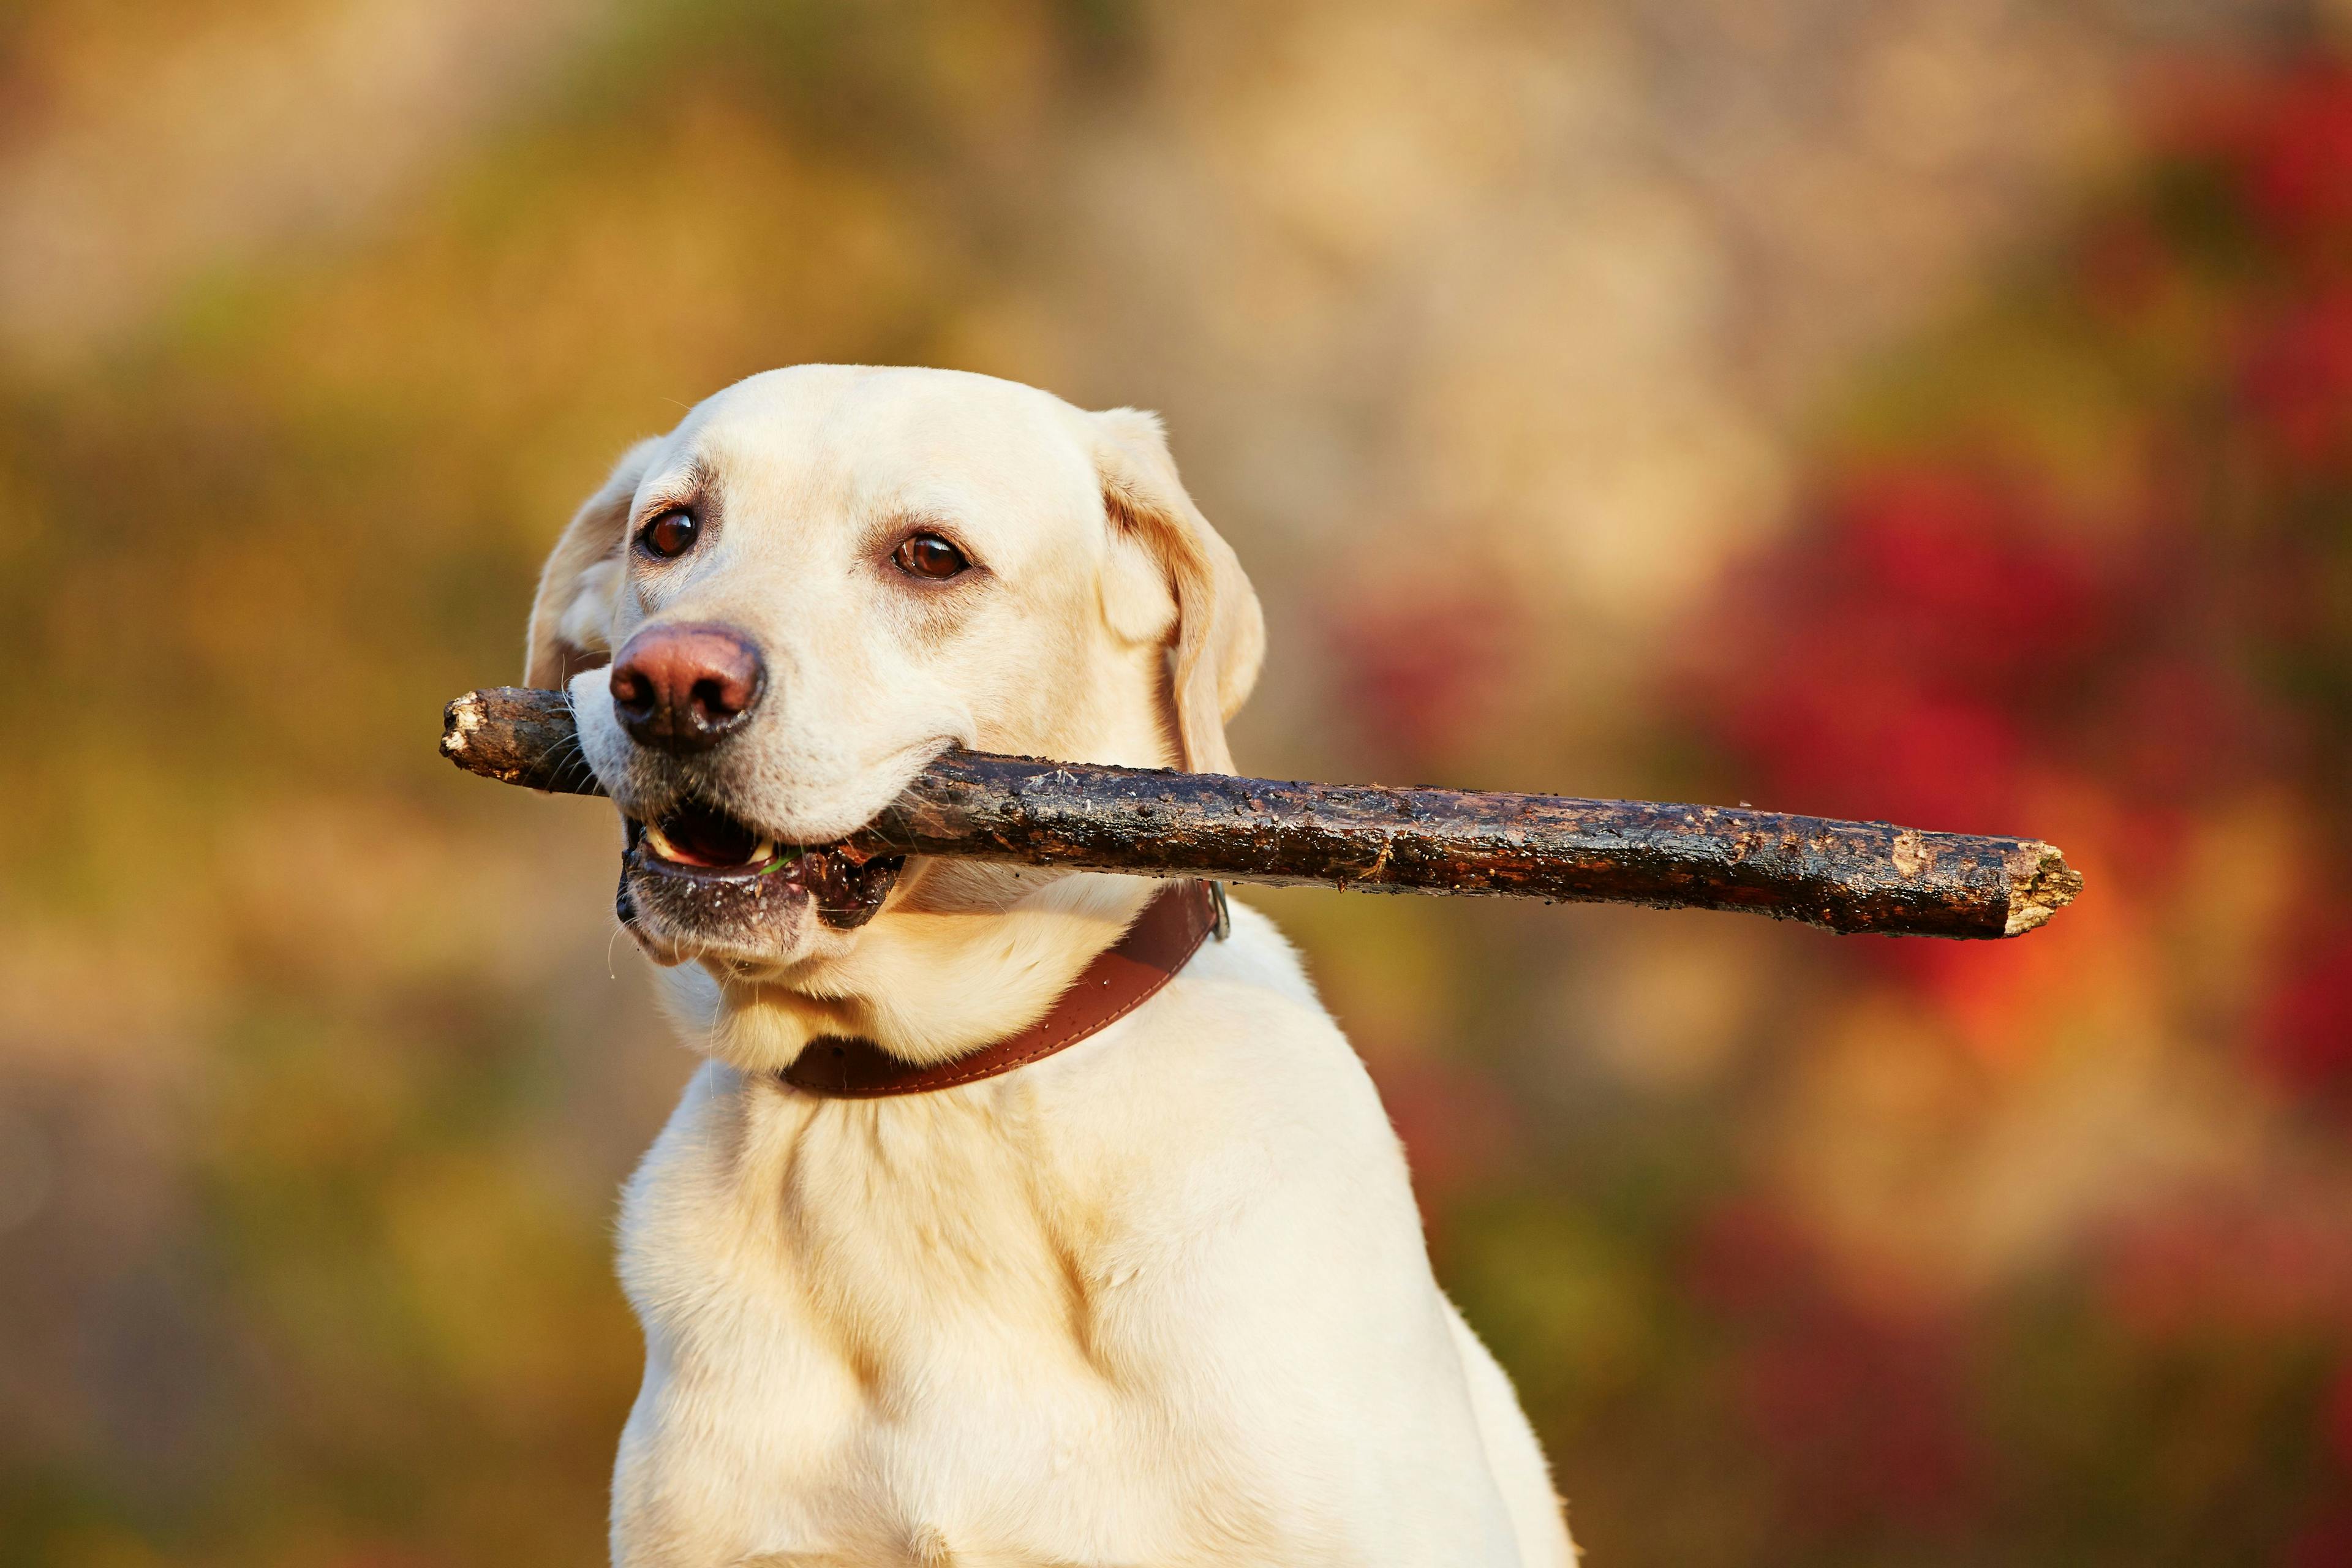 BluePearl warns dog owners not to use sticks when playing fetch